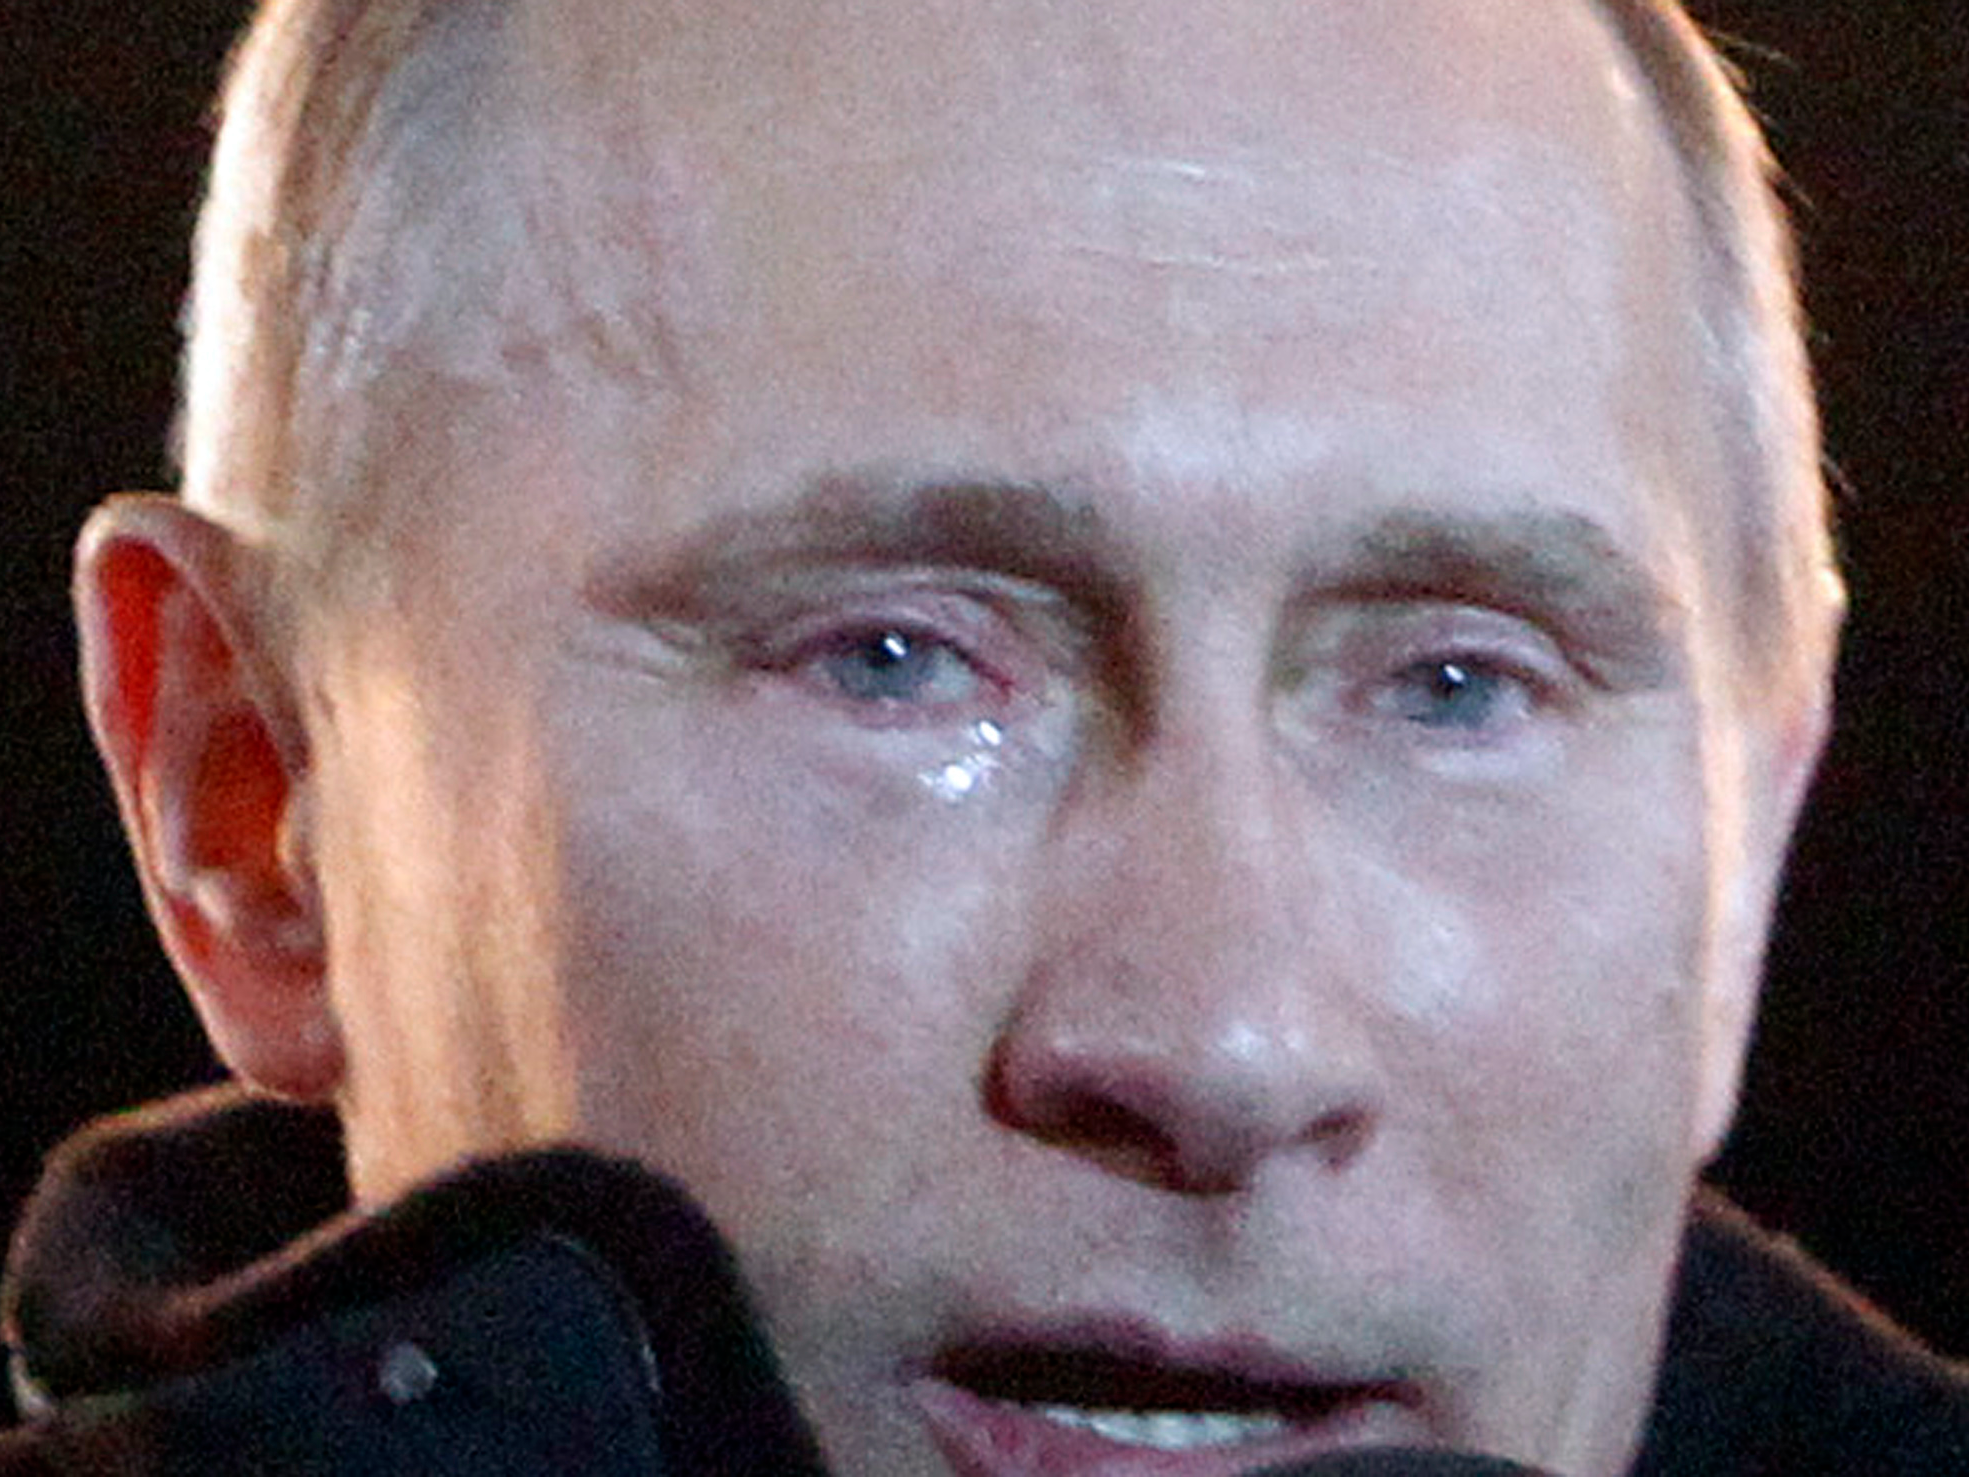 8-photos-of-world-leaders-crying-in-public.jpg